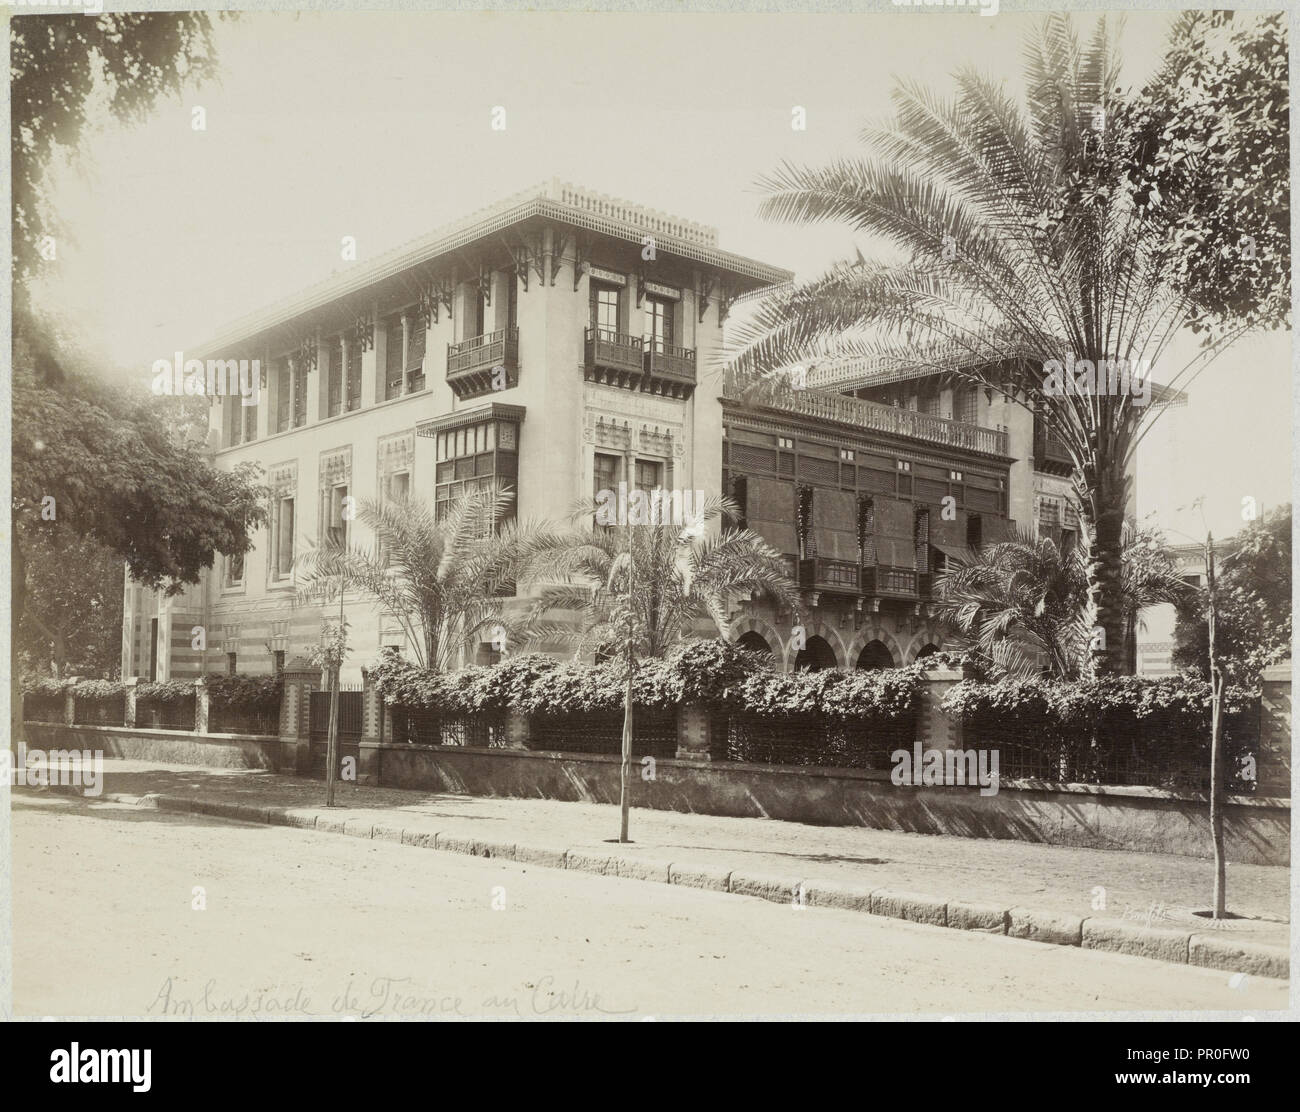 Ambassade de France au Caire, Basse Egypte Janvier 1906, Travel albums from Paul Fleury's trips to the Middle East Stock Photo